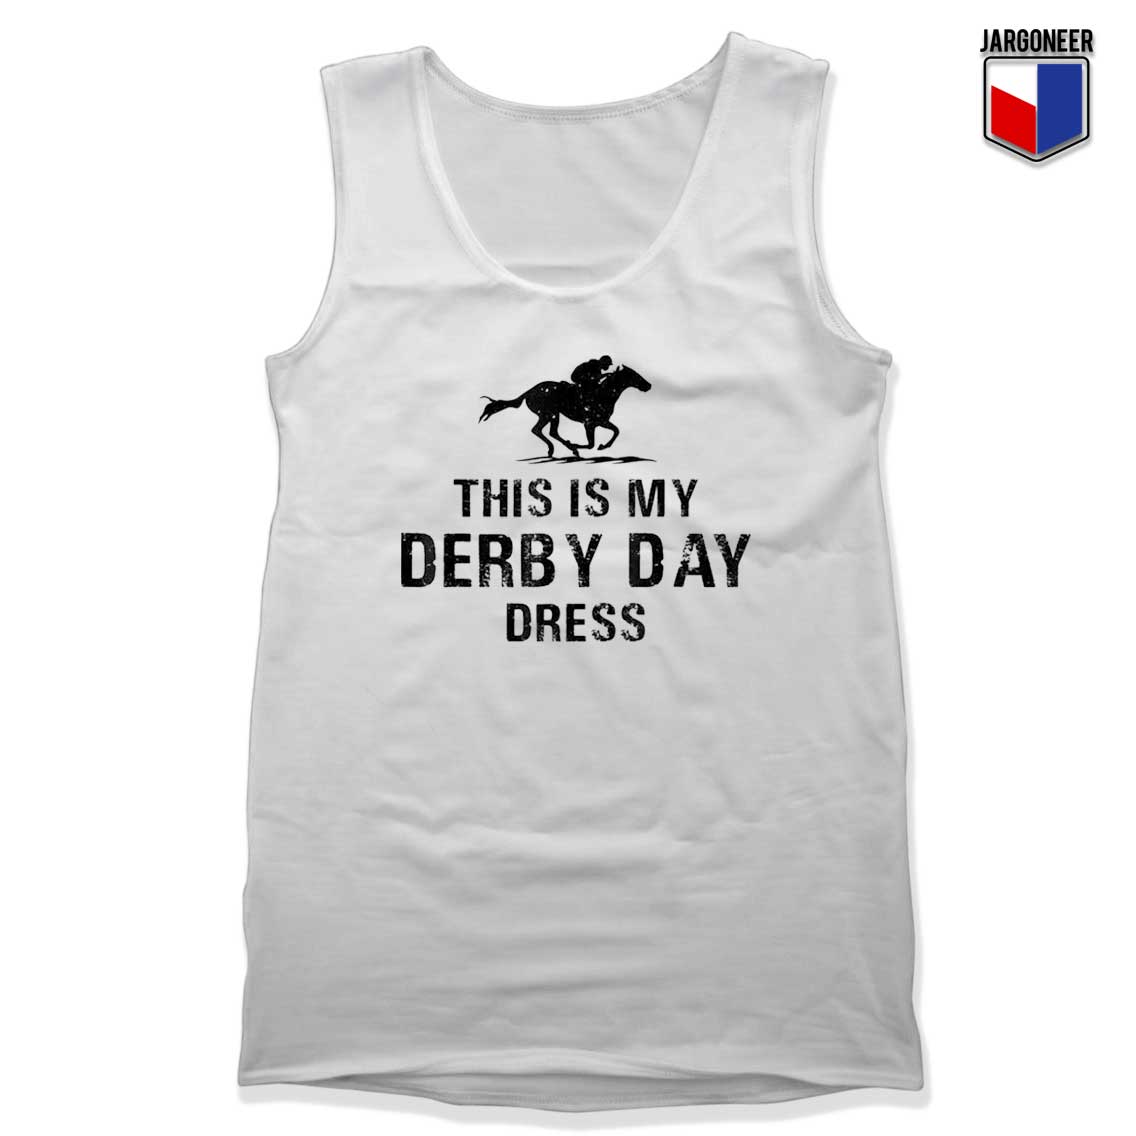 This Is My Derby Day Dress Tank Top - Shop Unique Graphic Cool Shirt Designs